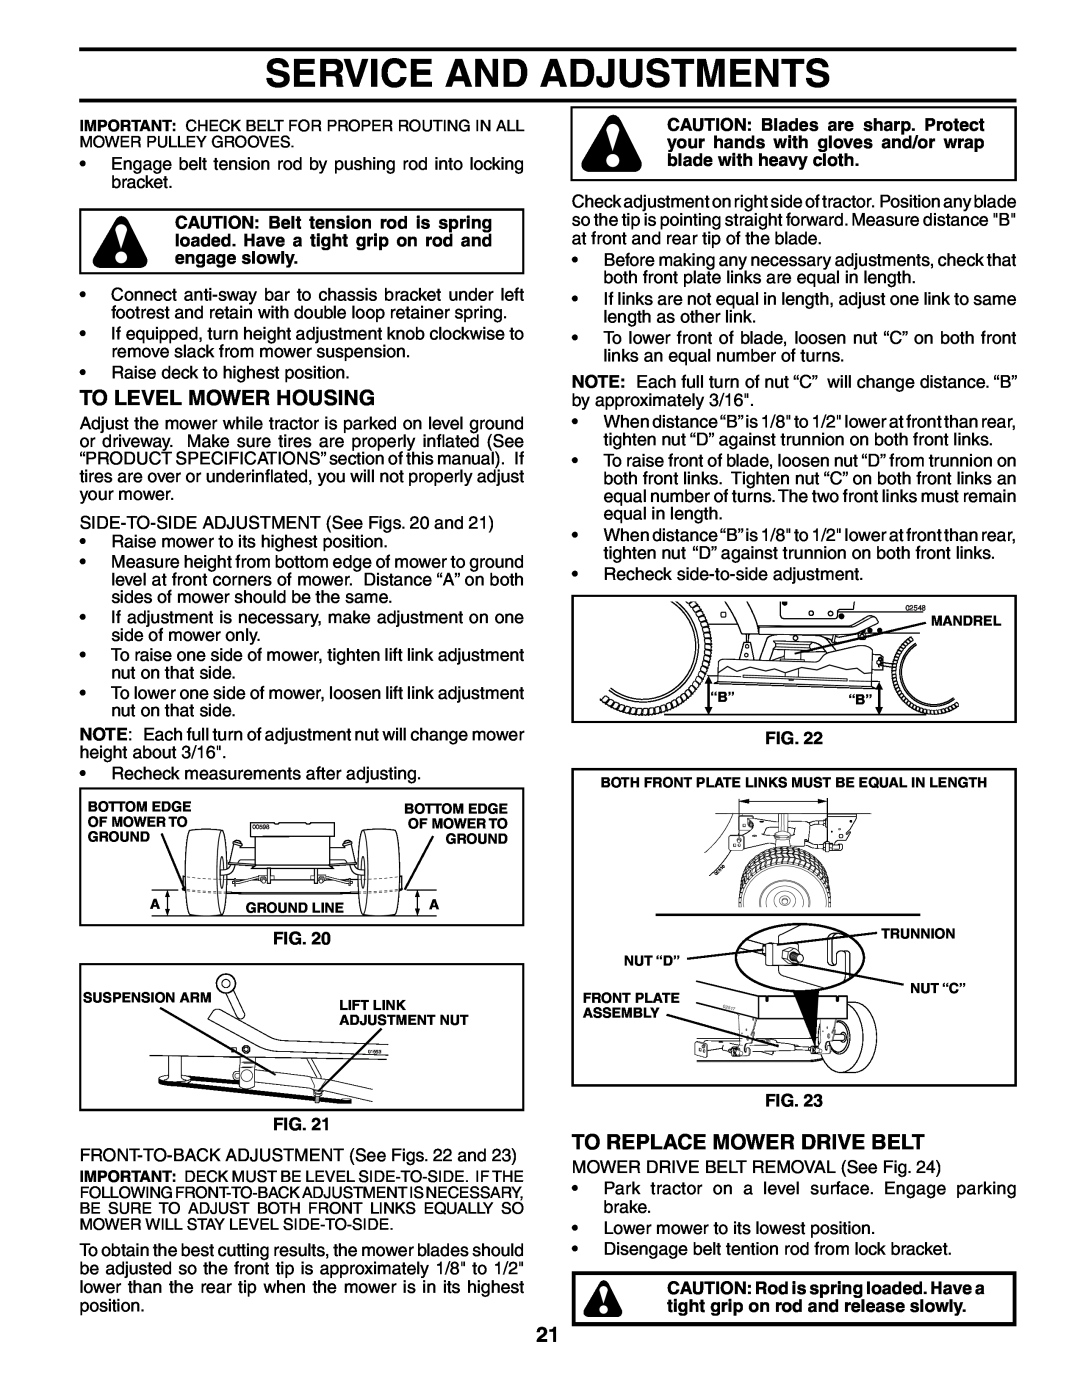 Poulan 187009 owner manual To Level Mower Housing, To Replace Mower Drive Belt, Service And Adjustments 